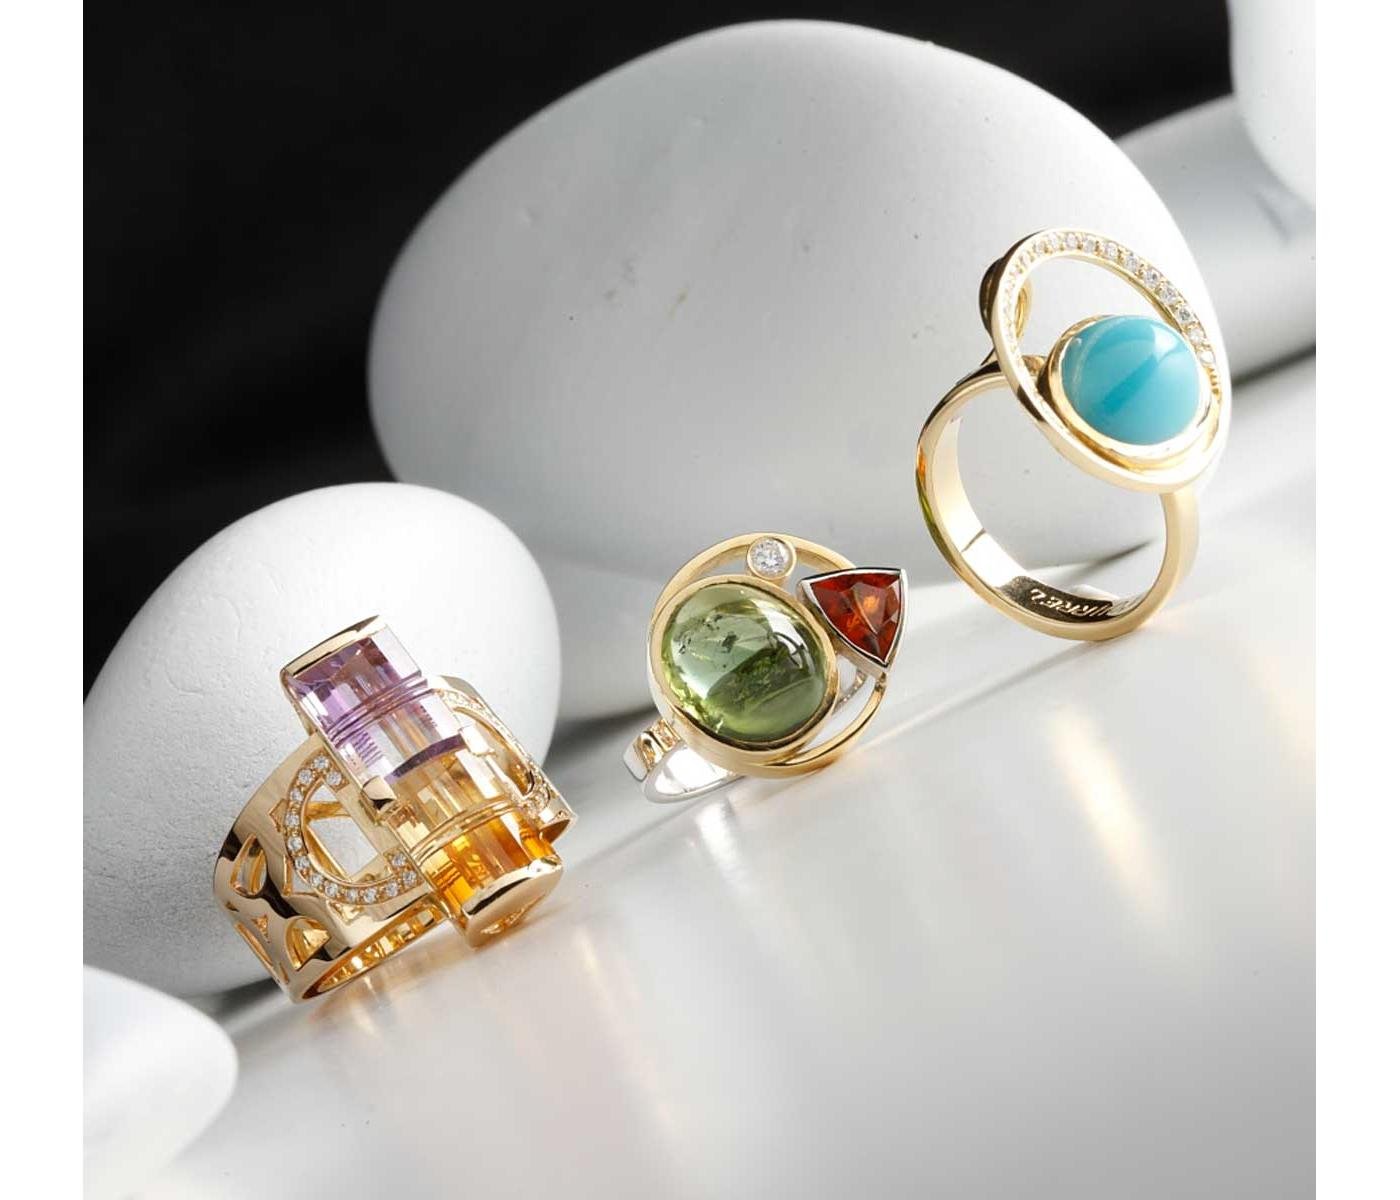 Rings by Tourrel Joaillerie